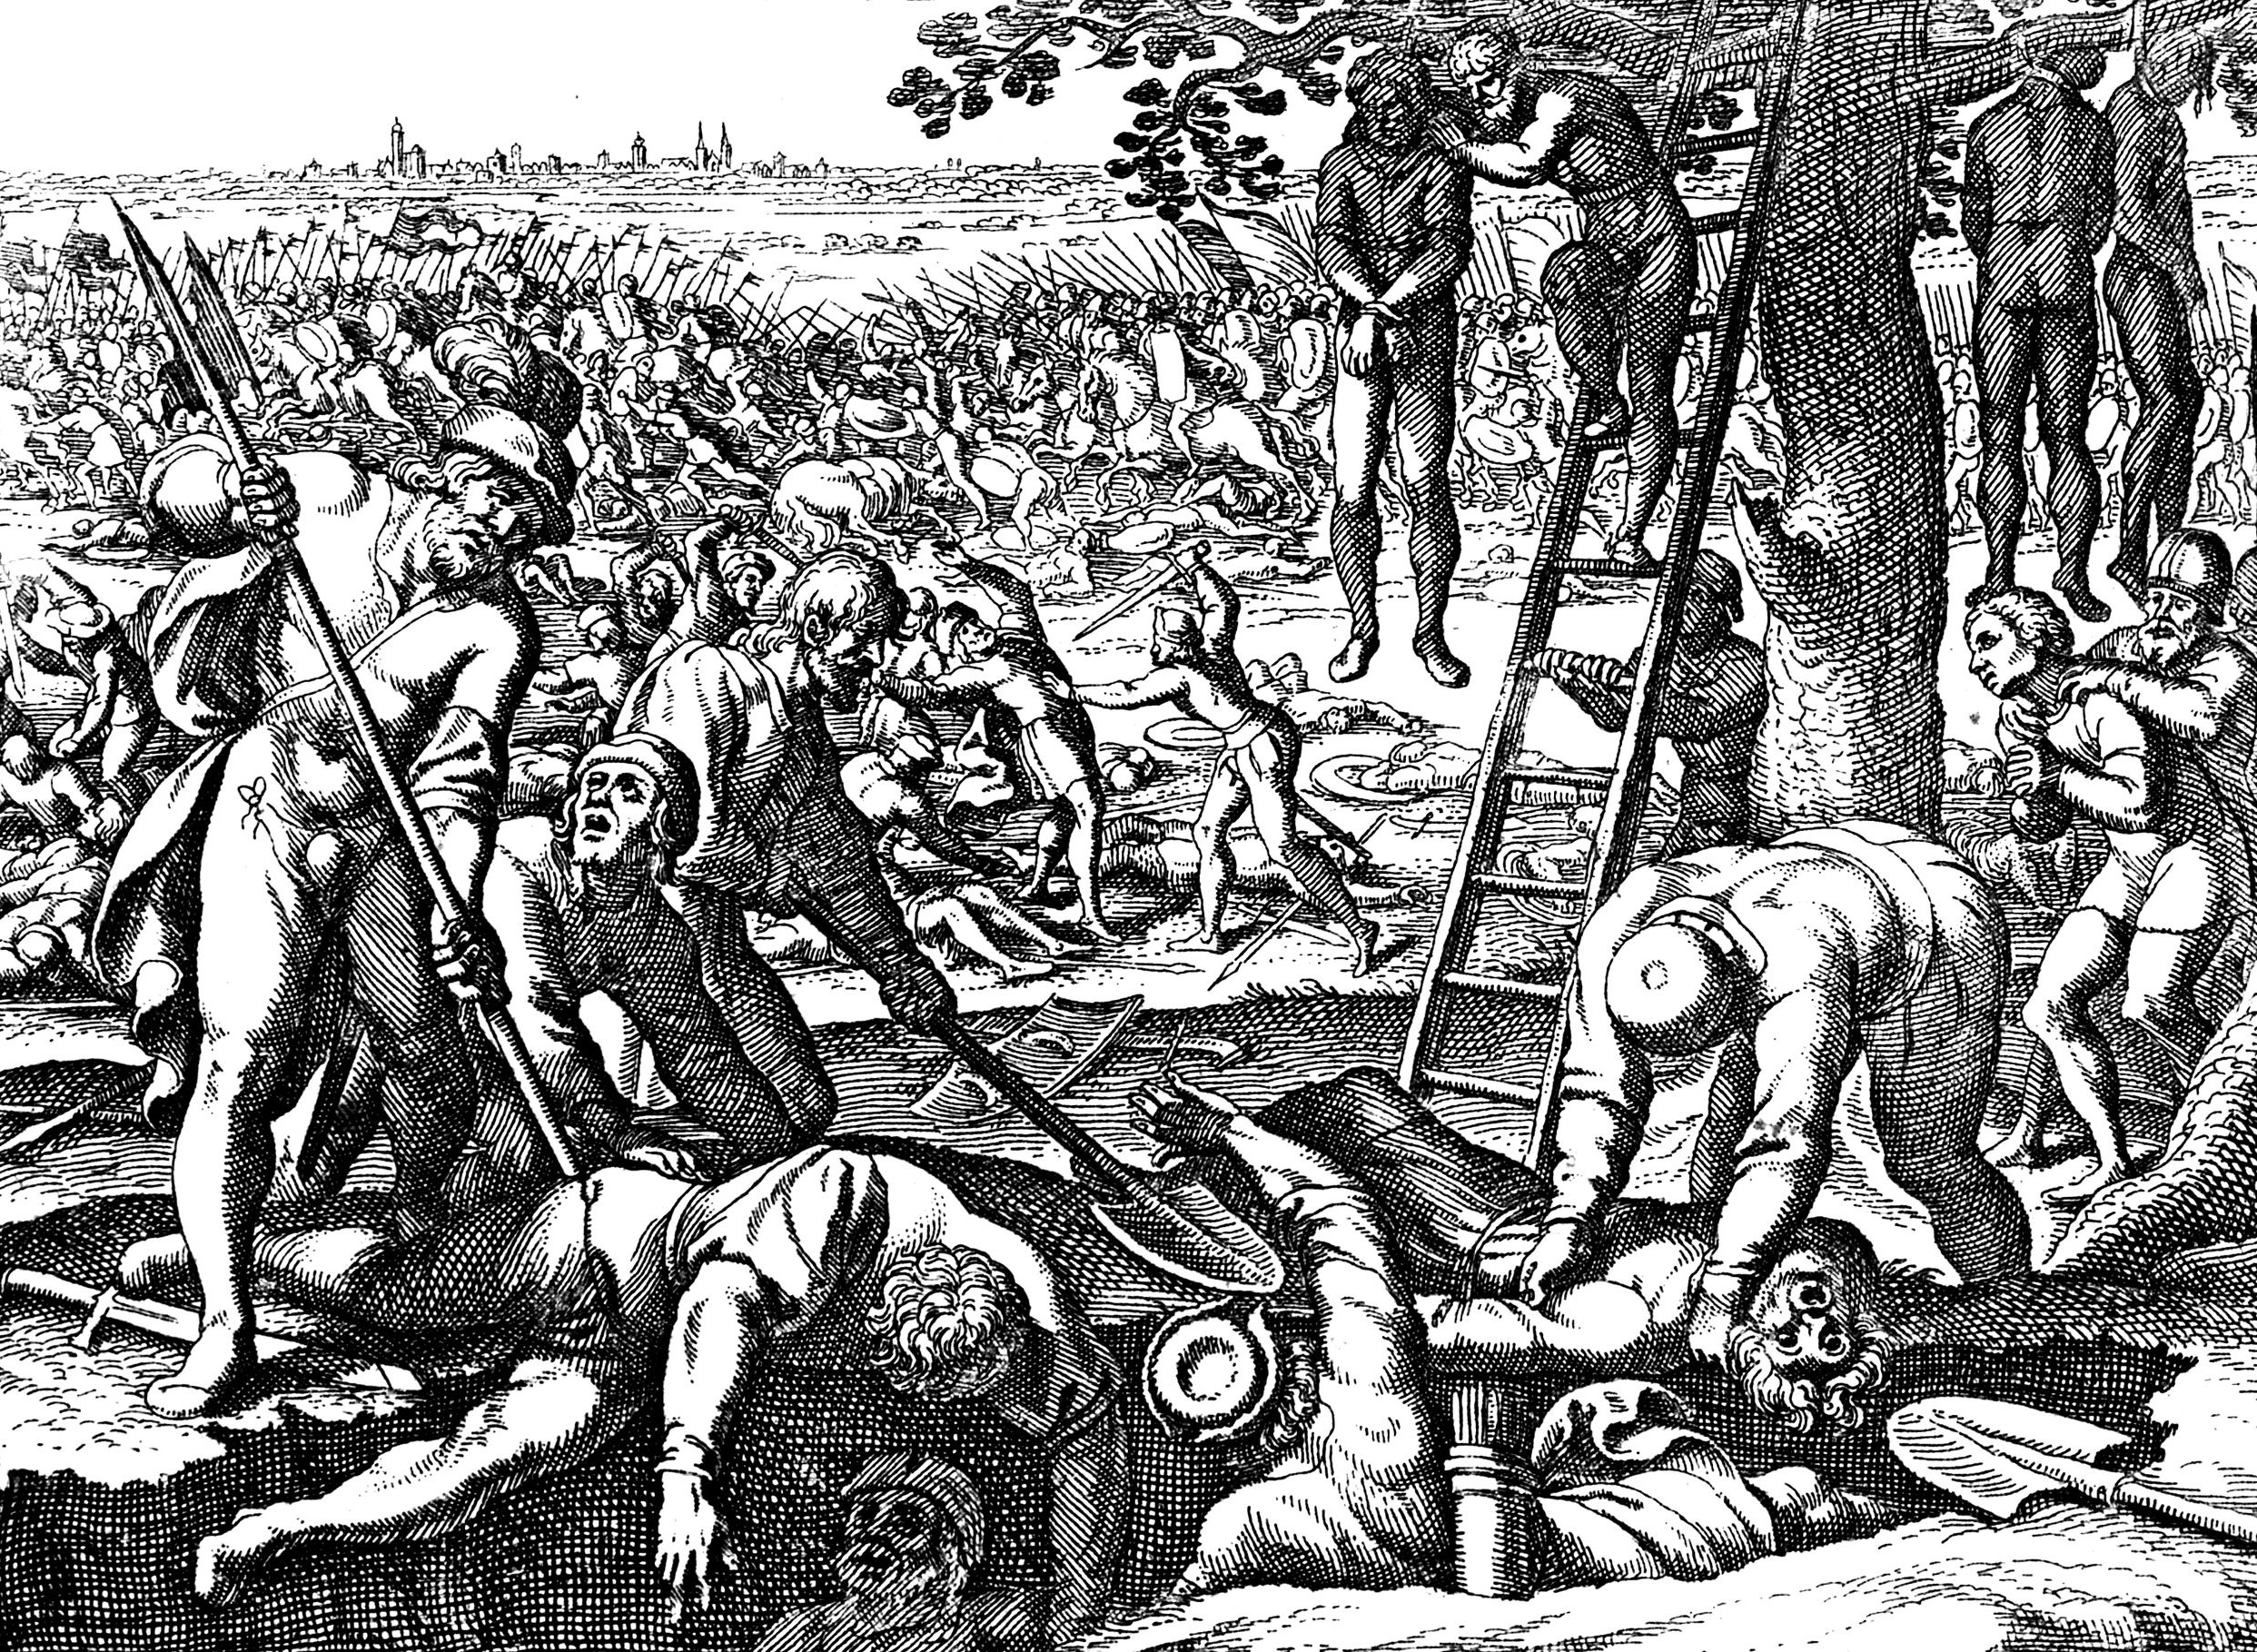 After the battle, German soldiers and civilians took brutal revenge on the beaten Magyars, as this 17th-century engraving graphically depicts. Few raiders escaped.